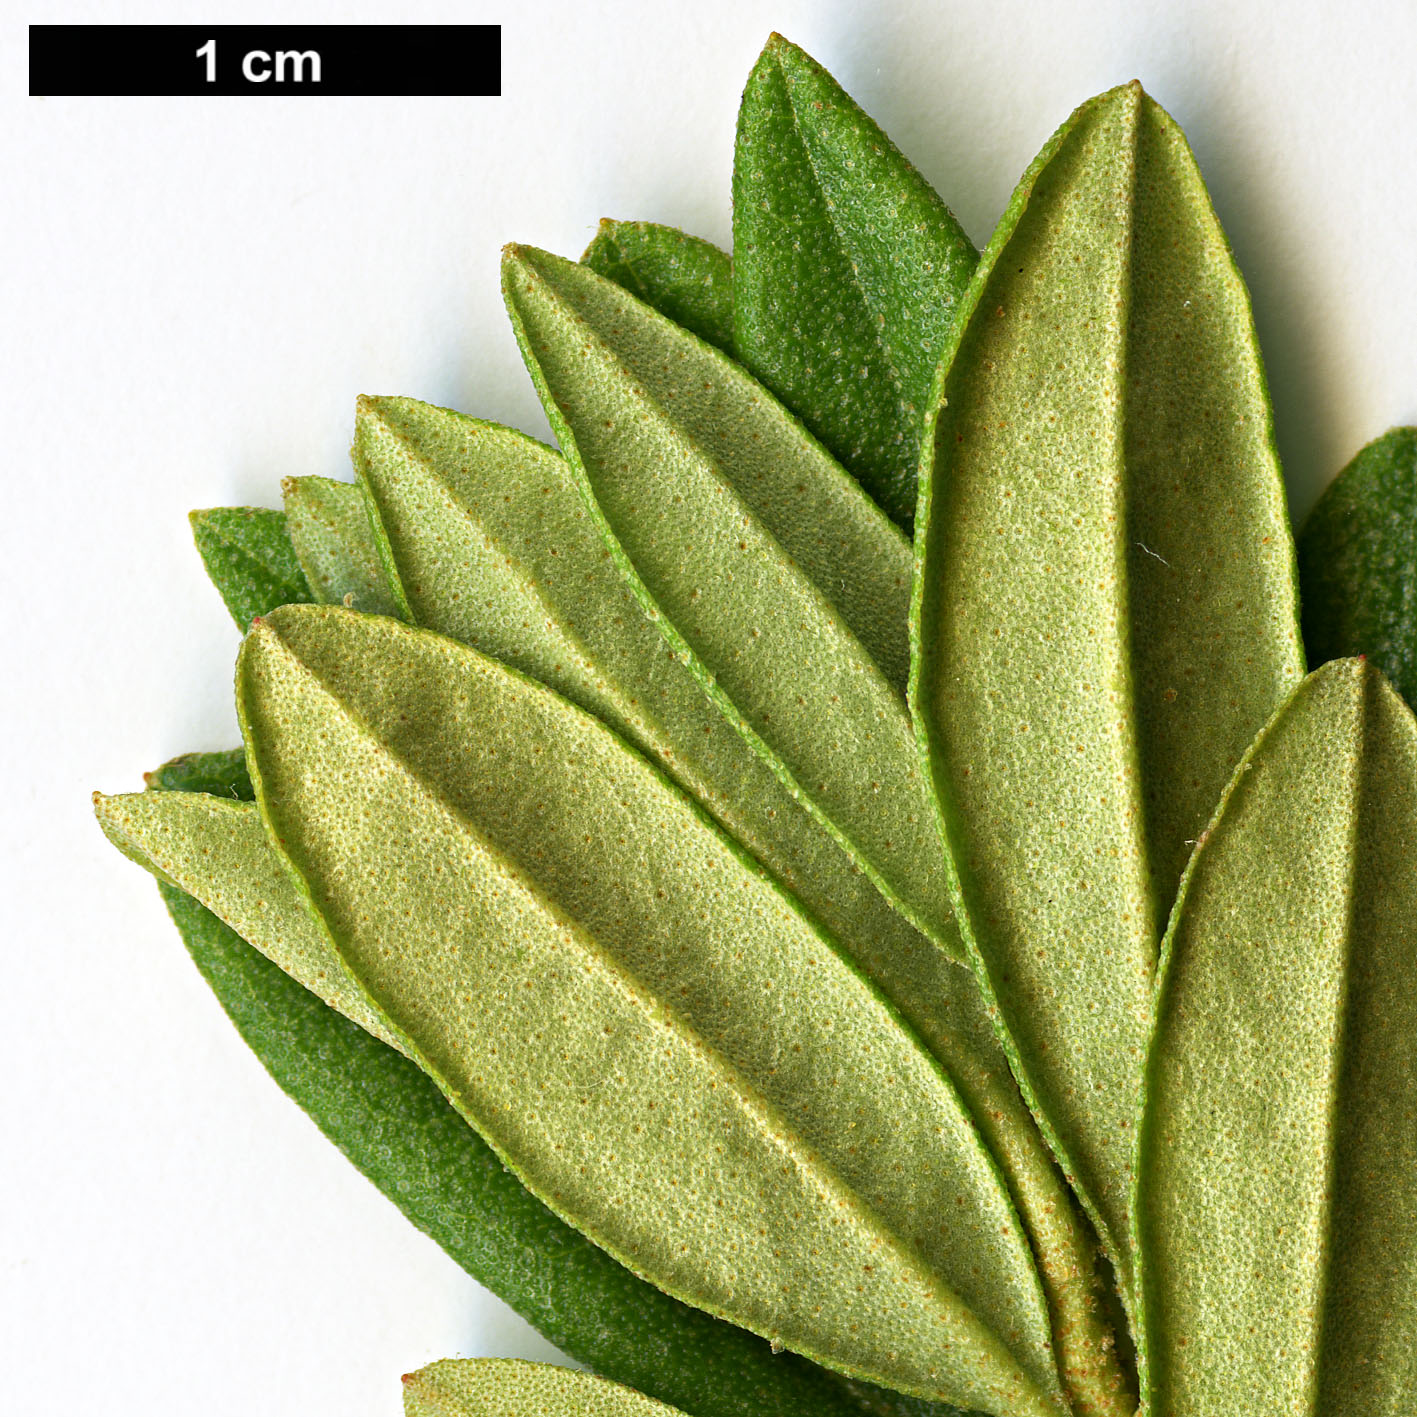 High resolution image: Family: Ericaceae - Genus: Rhododendron - Taxon: hippophaeoides